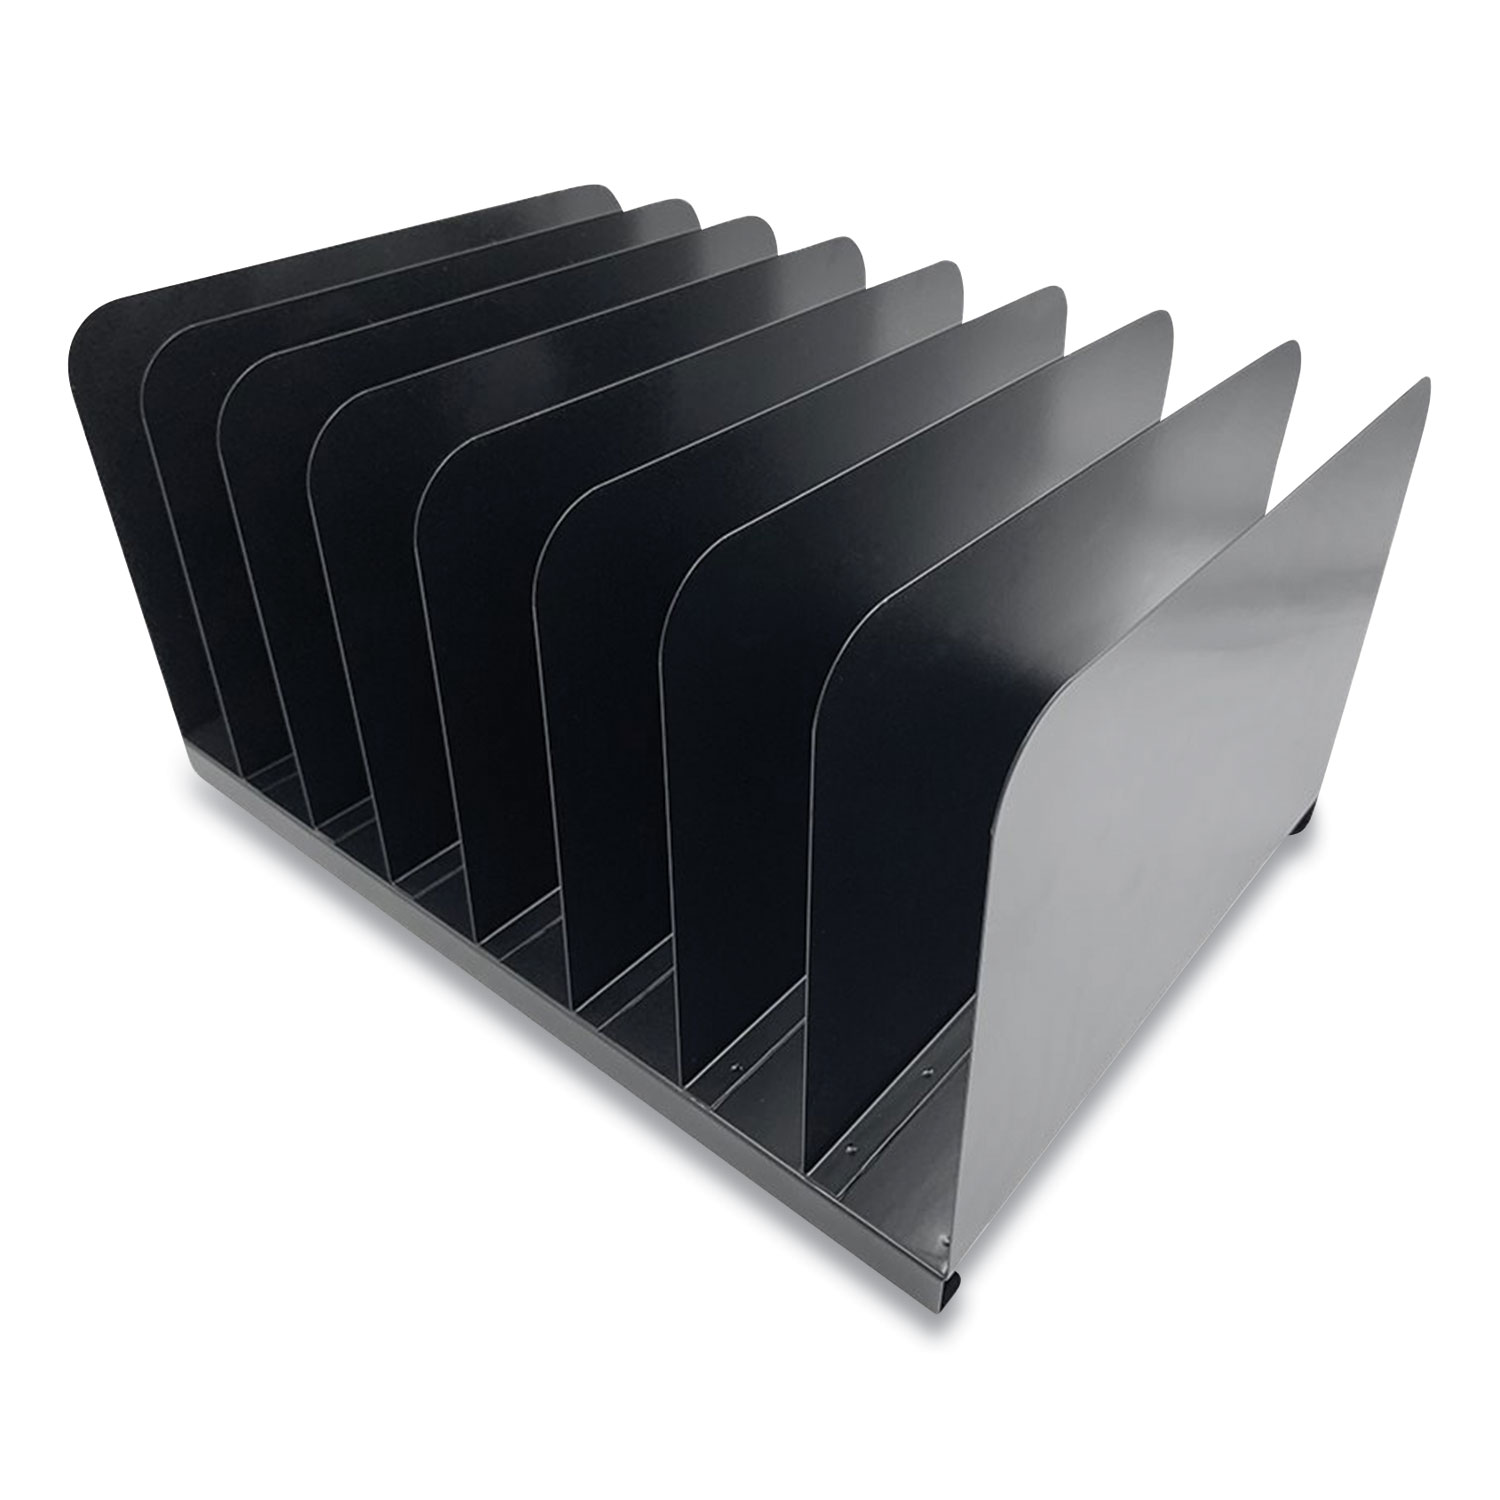 Huron Steel Vertical File Organizer, 8 Sections, Letter Size Files, 11 x 15 x 7.75, Black